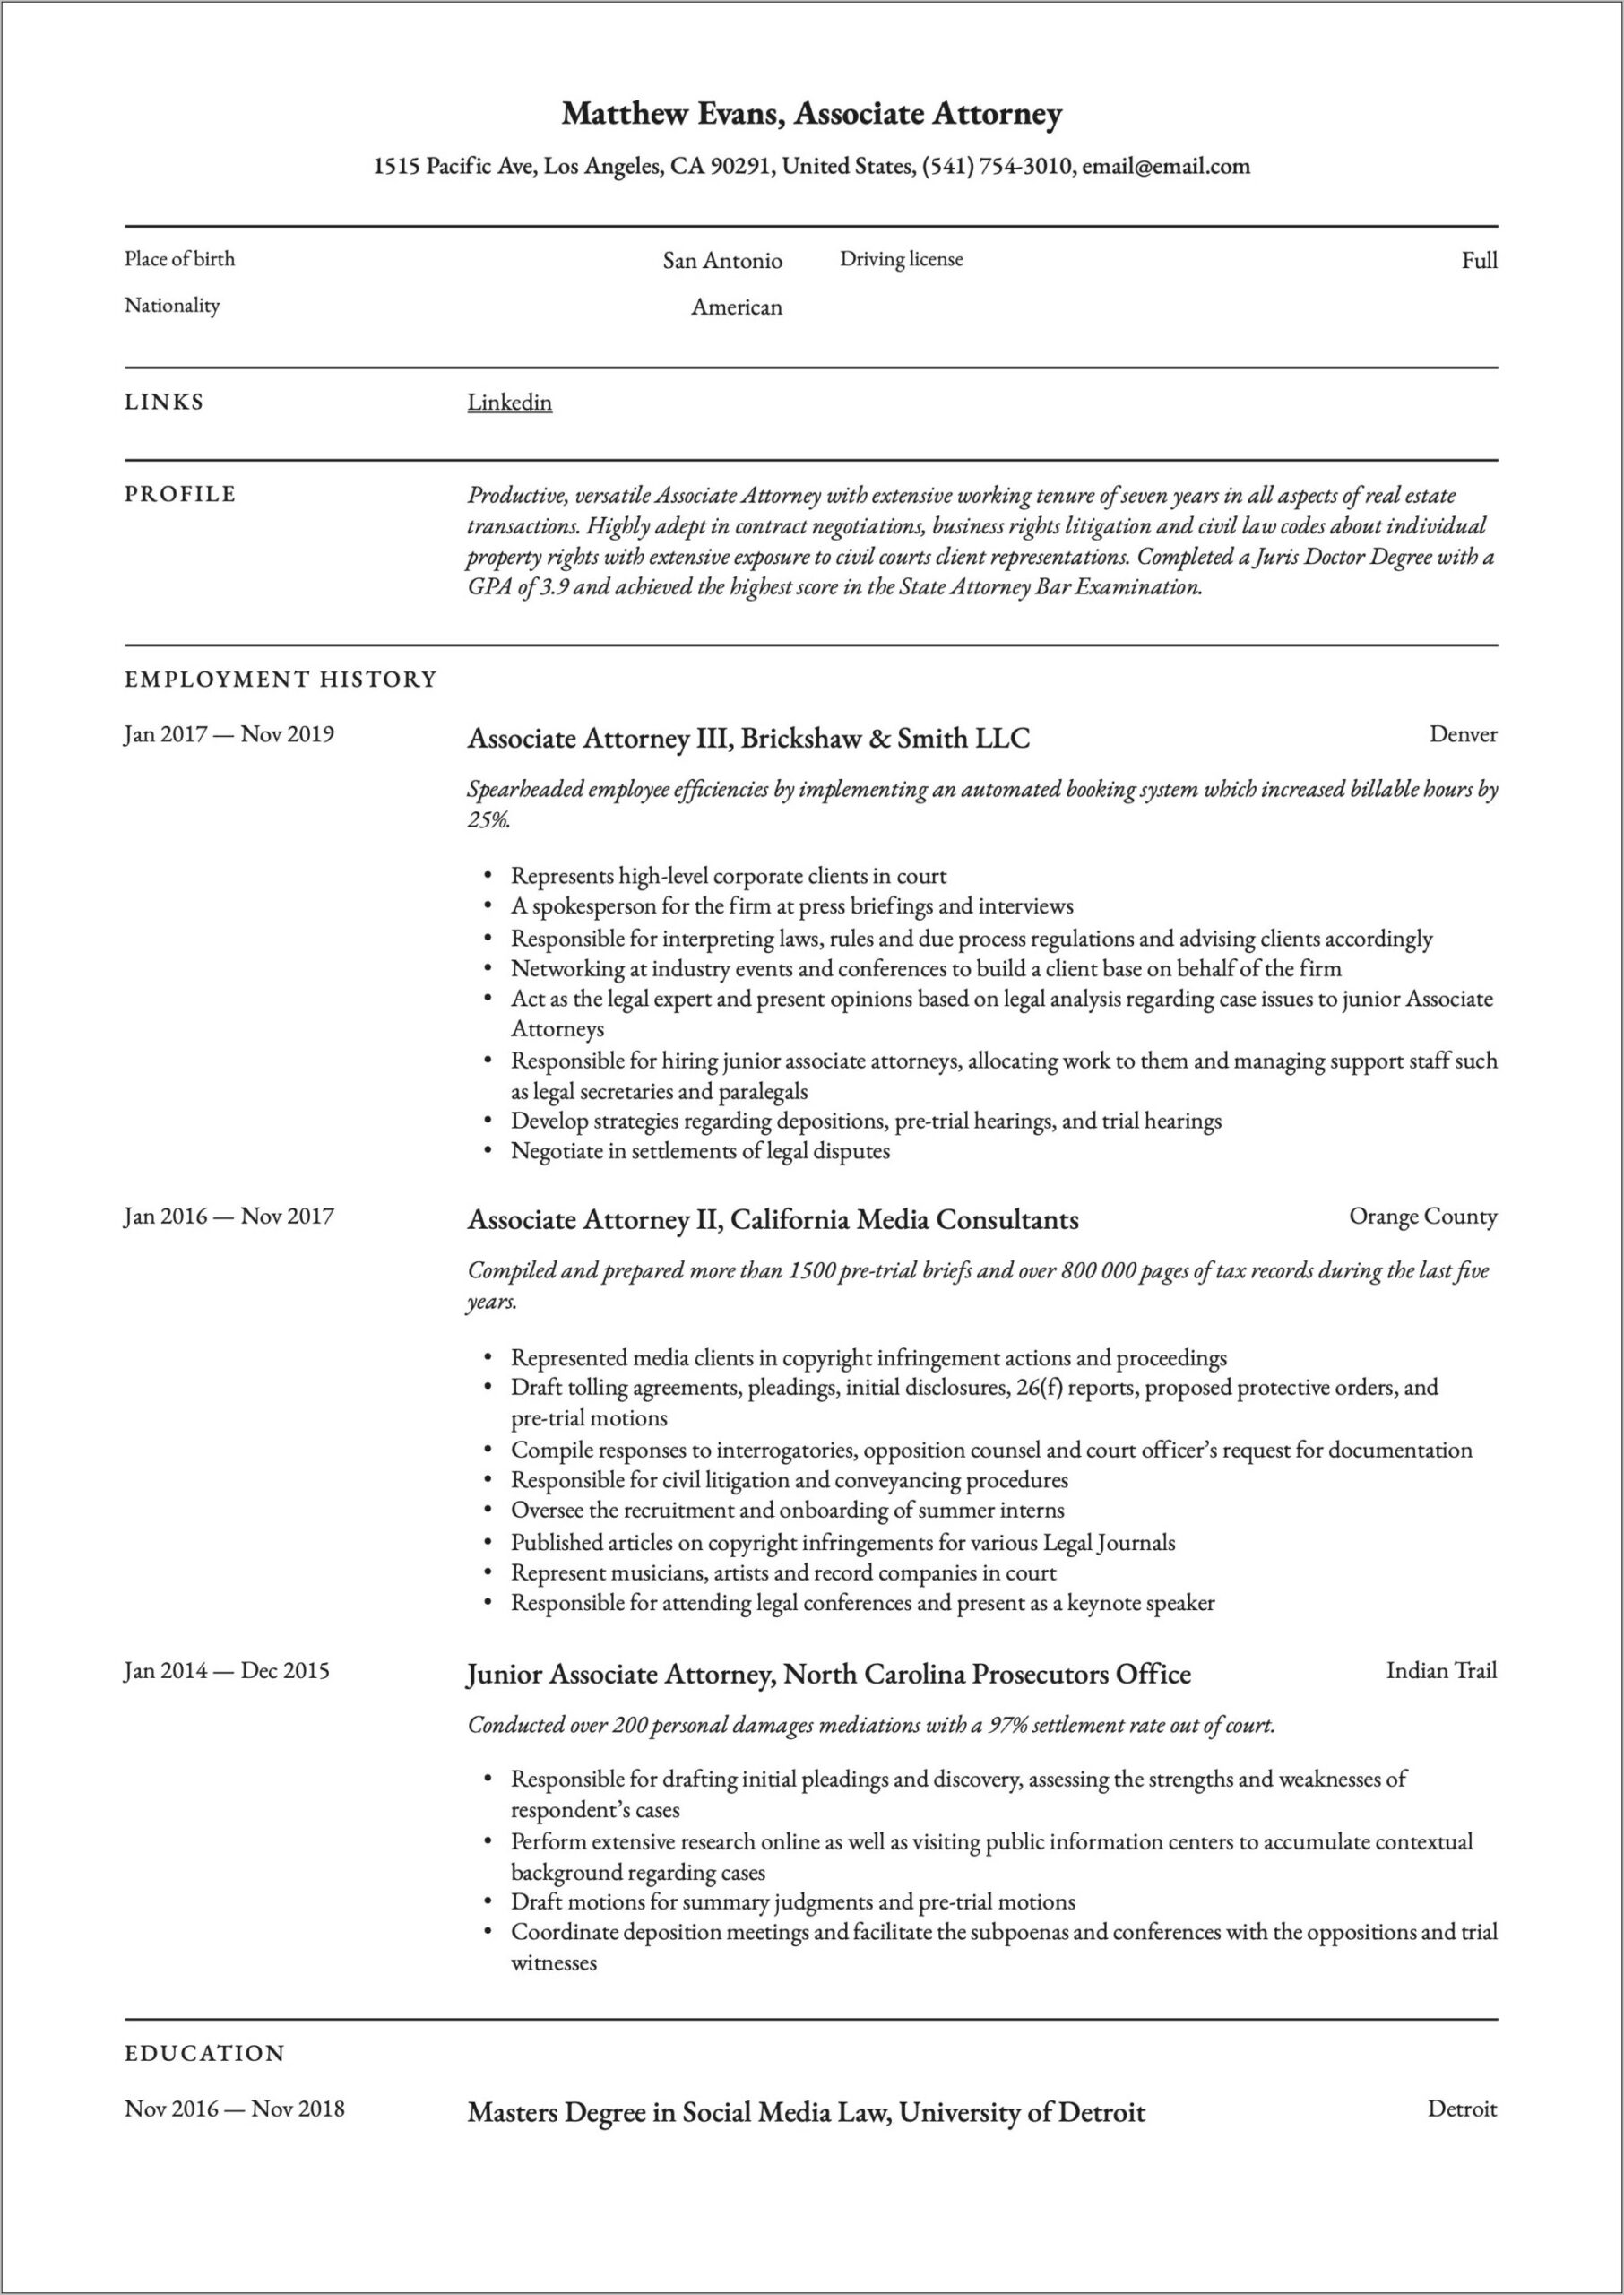 Bar Admission On Resume Examples